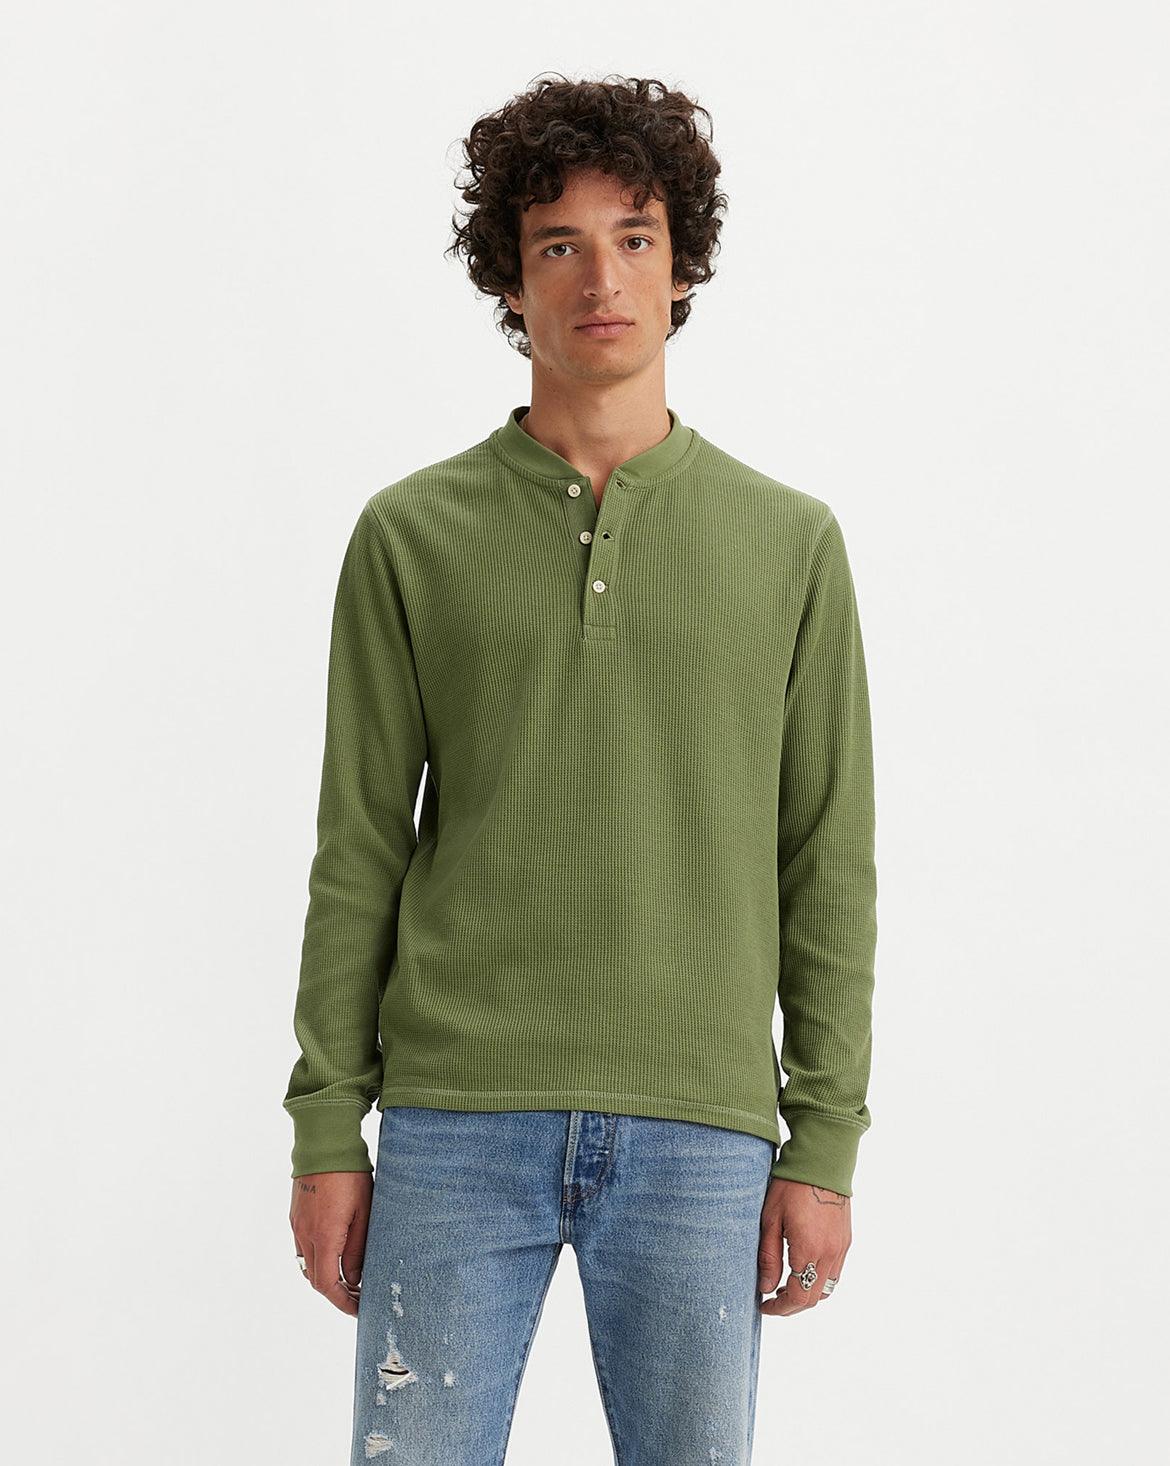 LONG-SLEEVE THERMAL HENLEY - GREEN